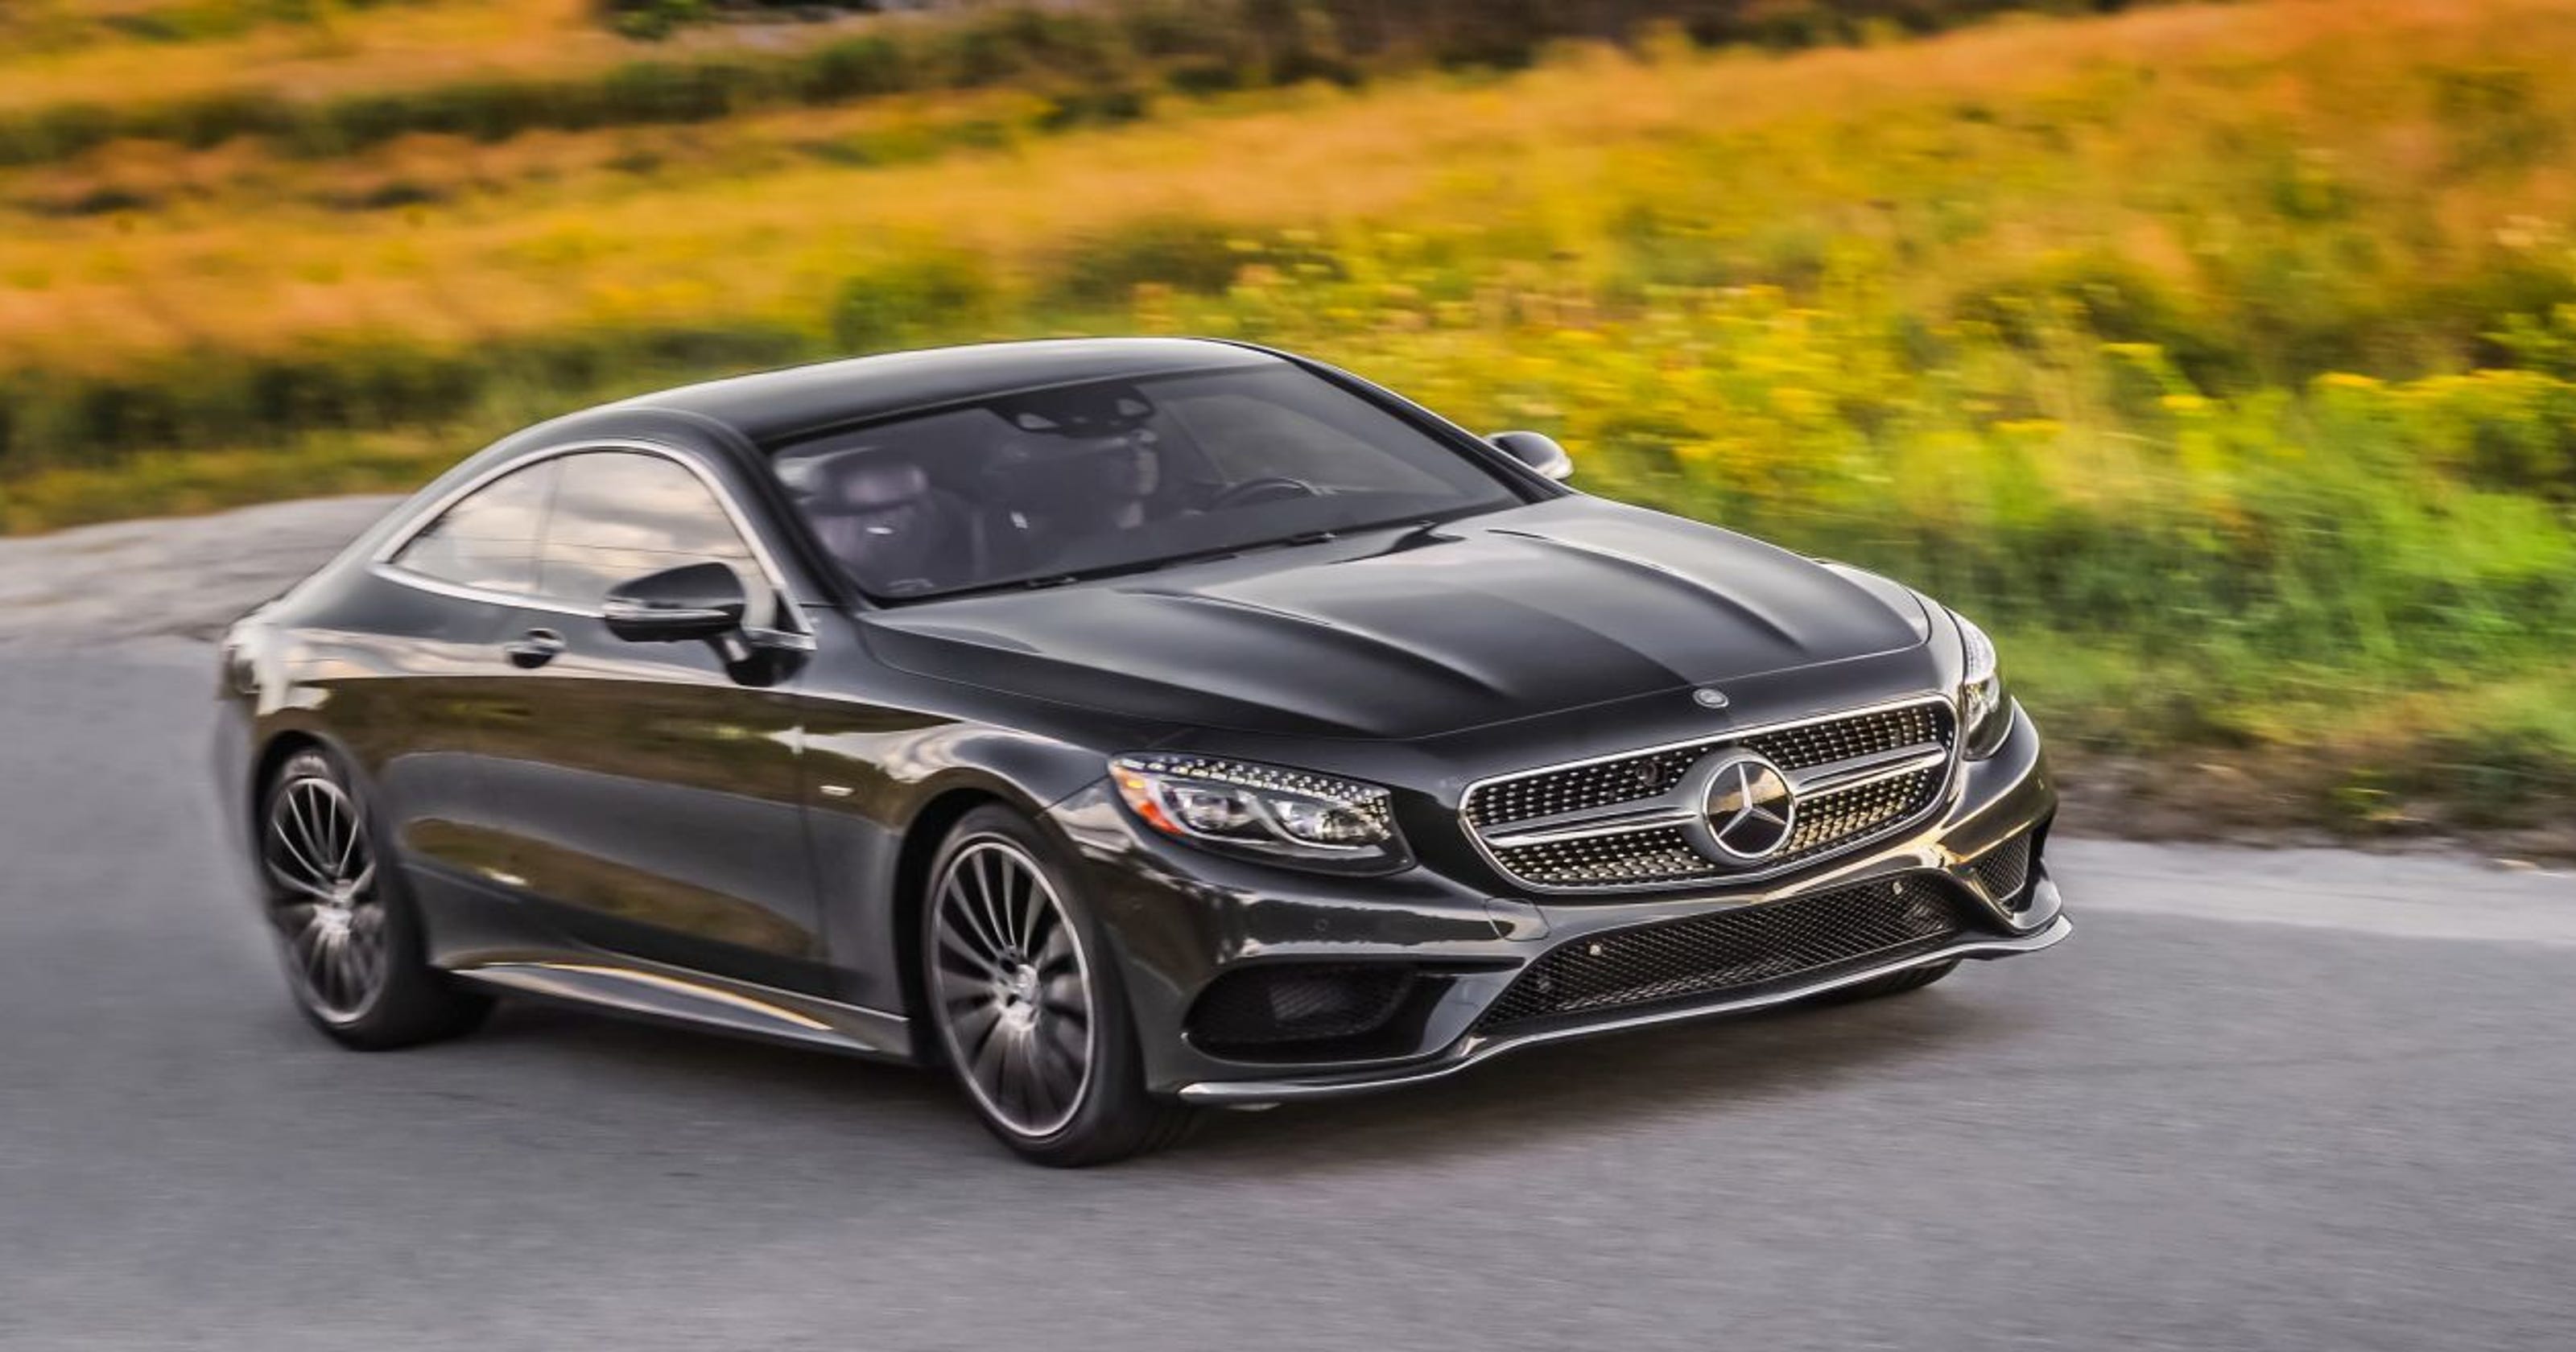 Personal statement: 2015 Mercedes-Benz S550 4MATIC coupe